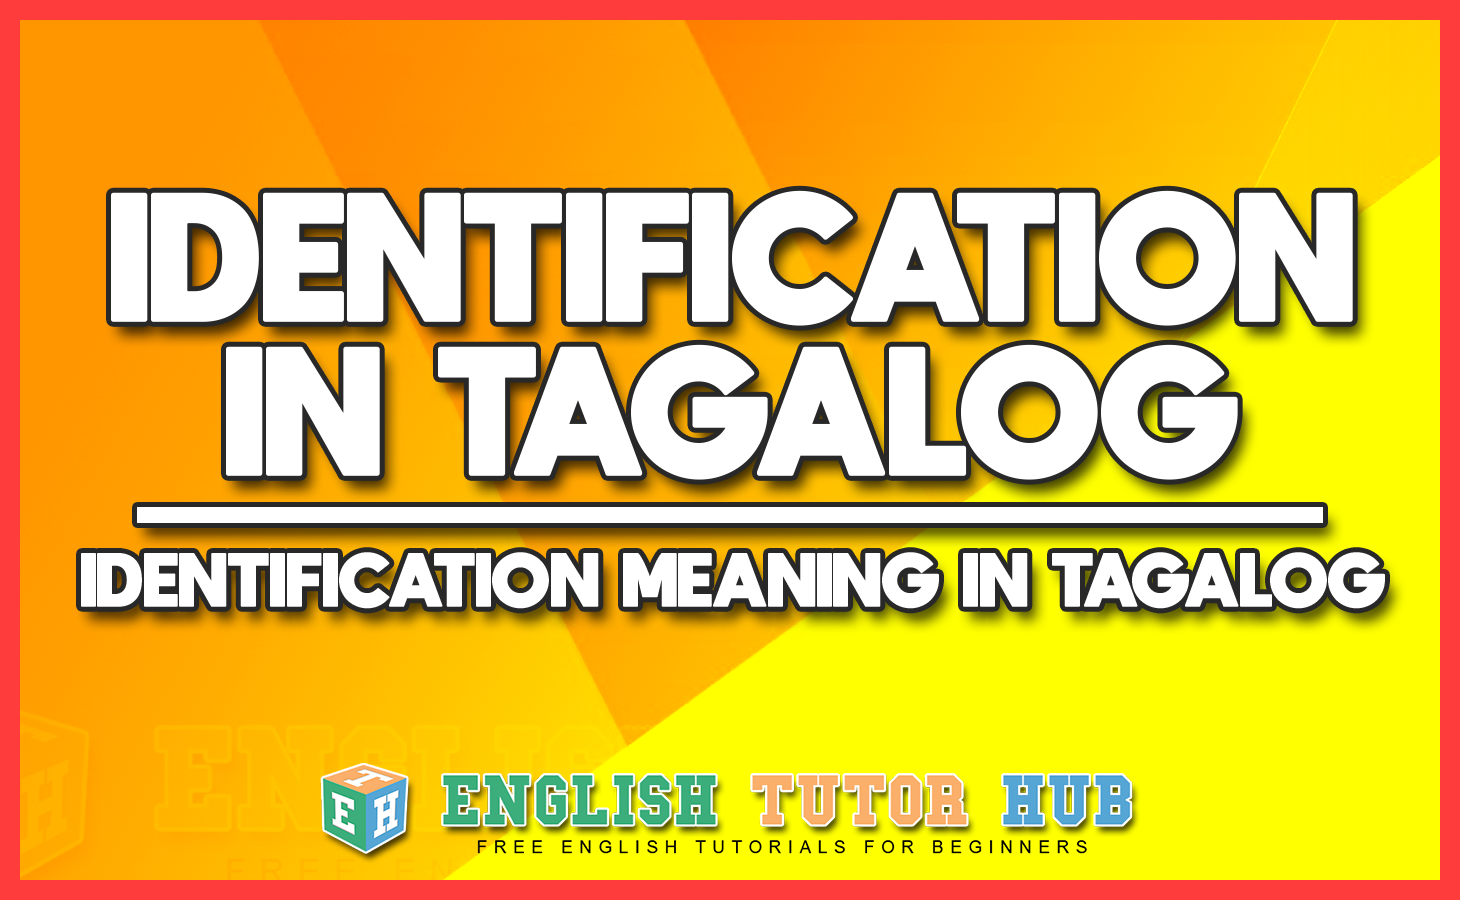 biography meaning in tagalog